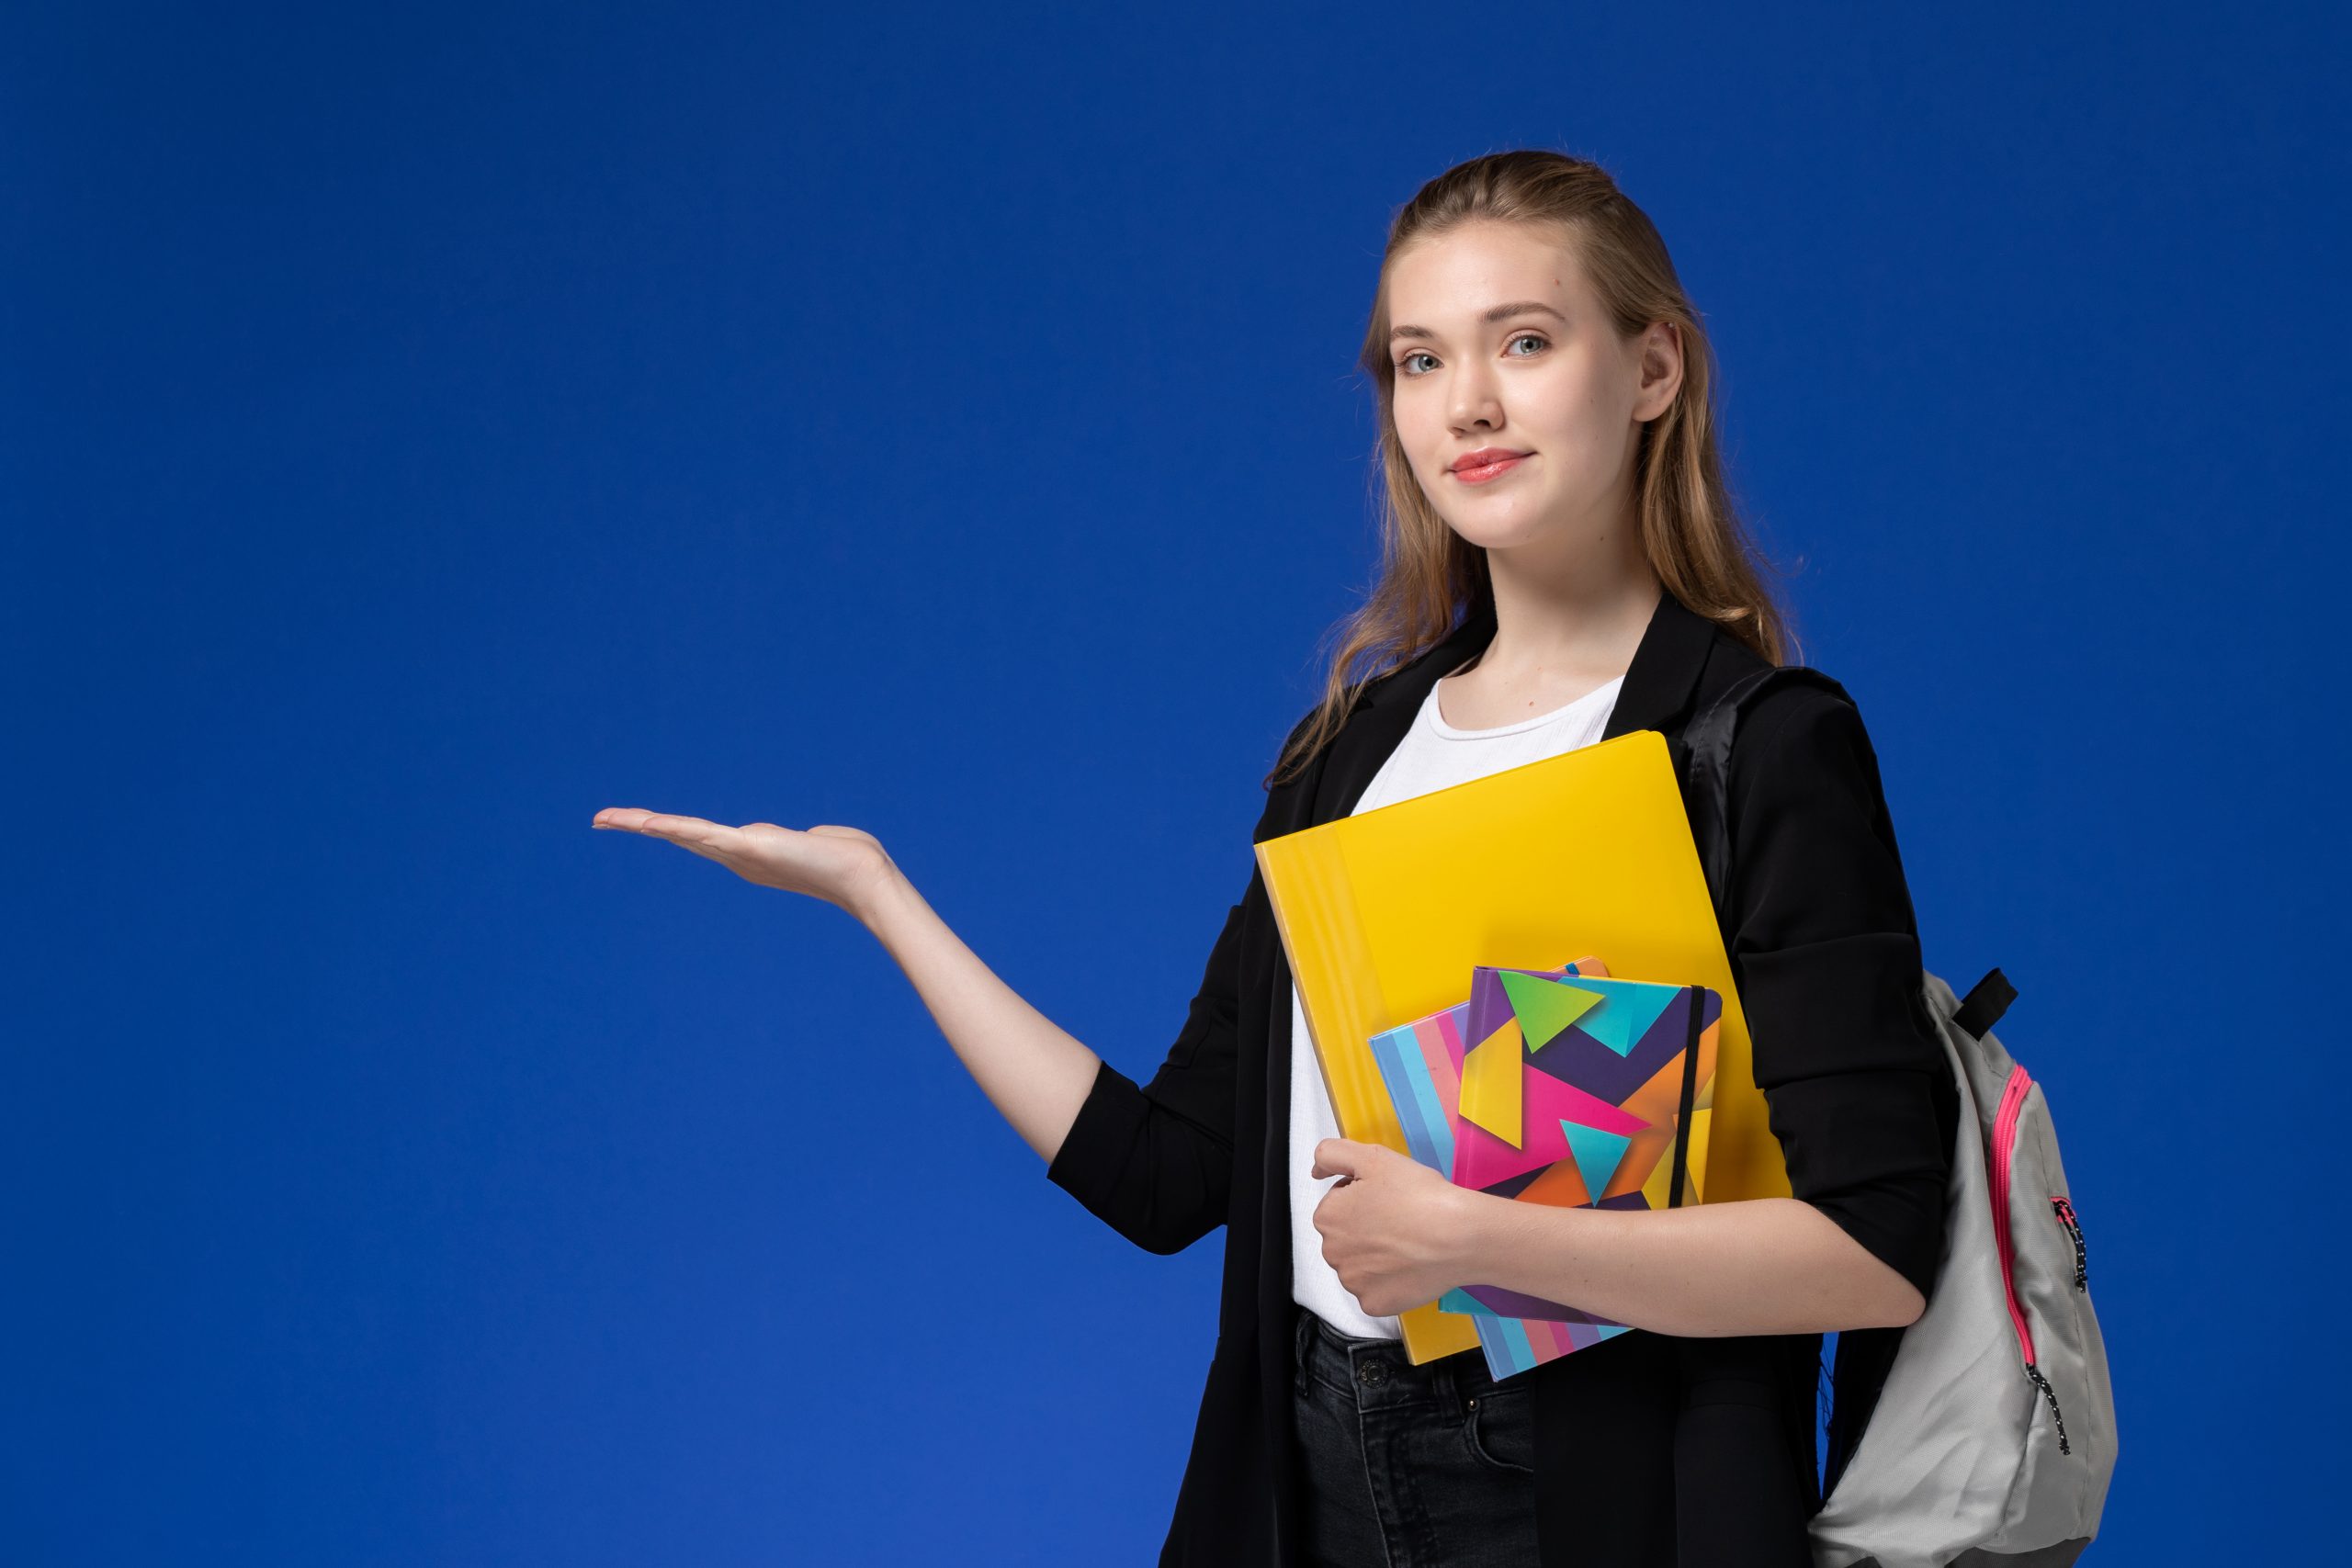 front-view-female-student-white-shirt-black-jacket-wearing-backpack-holding-files-with-copybooks-blue-wall-college-university-lessons